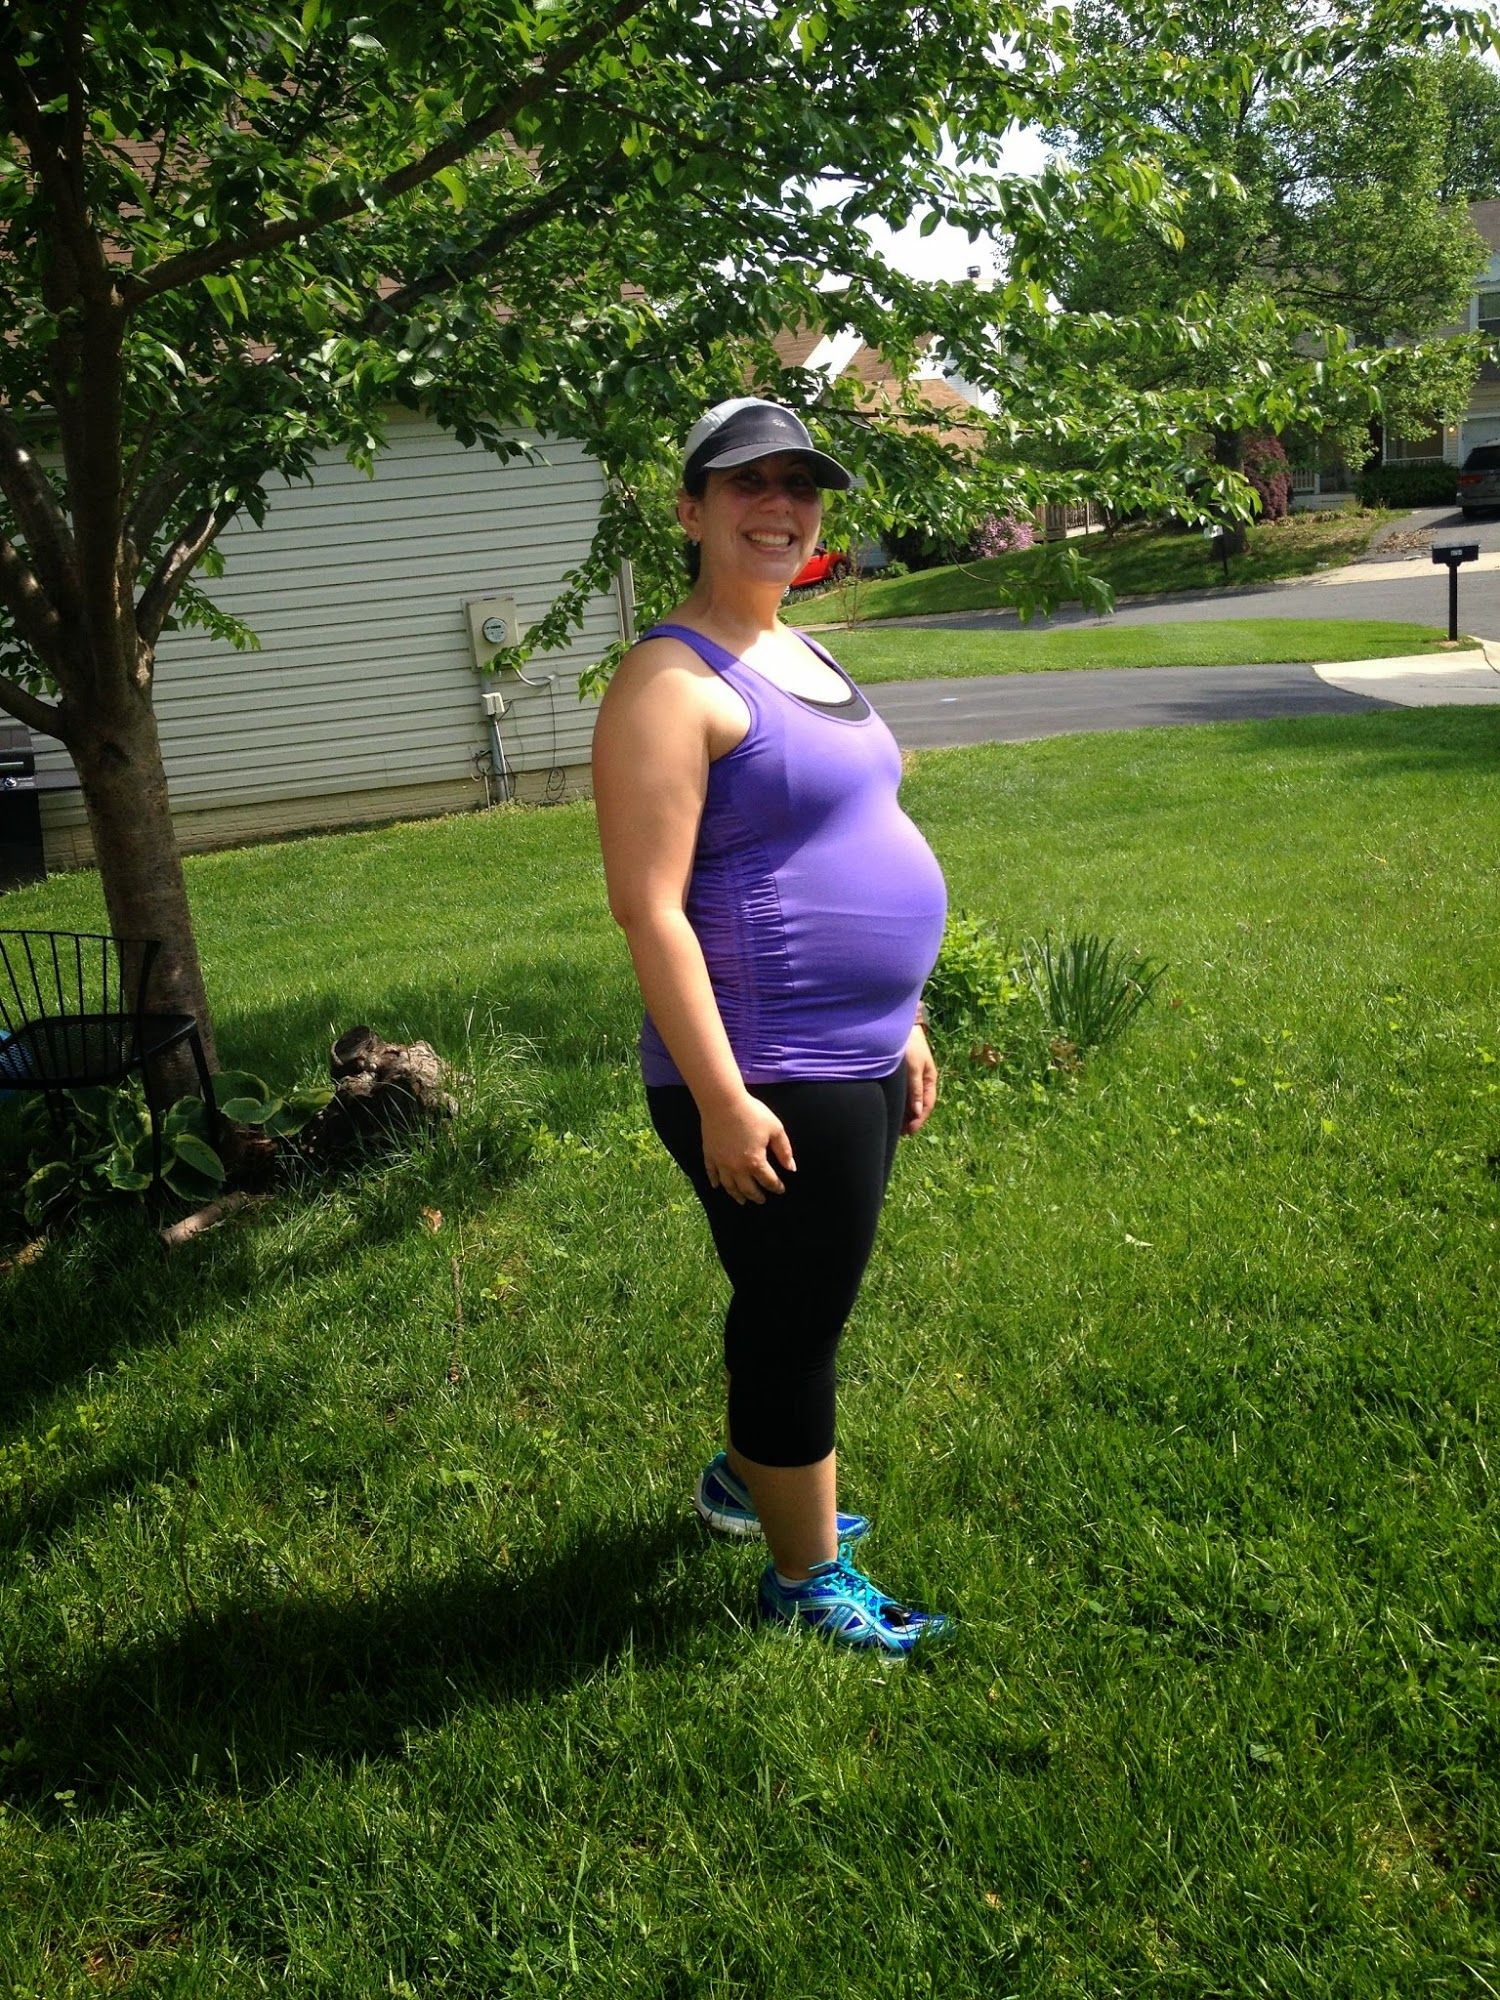  14 weeks pregnant and still running 